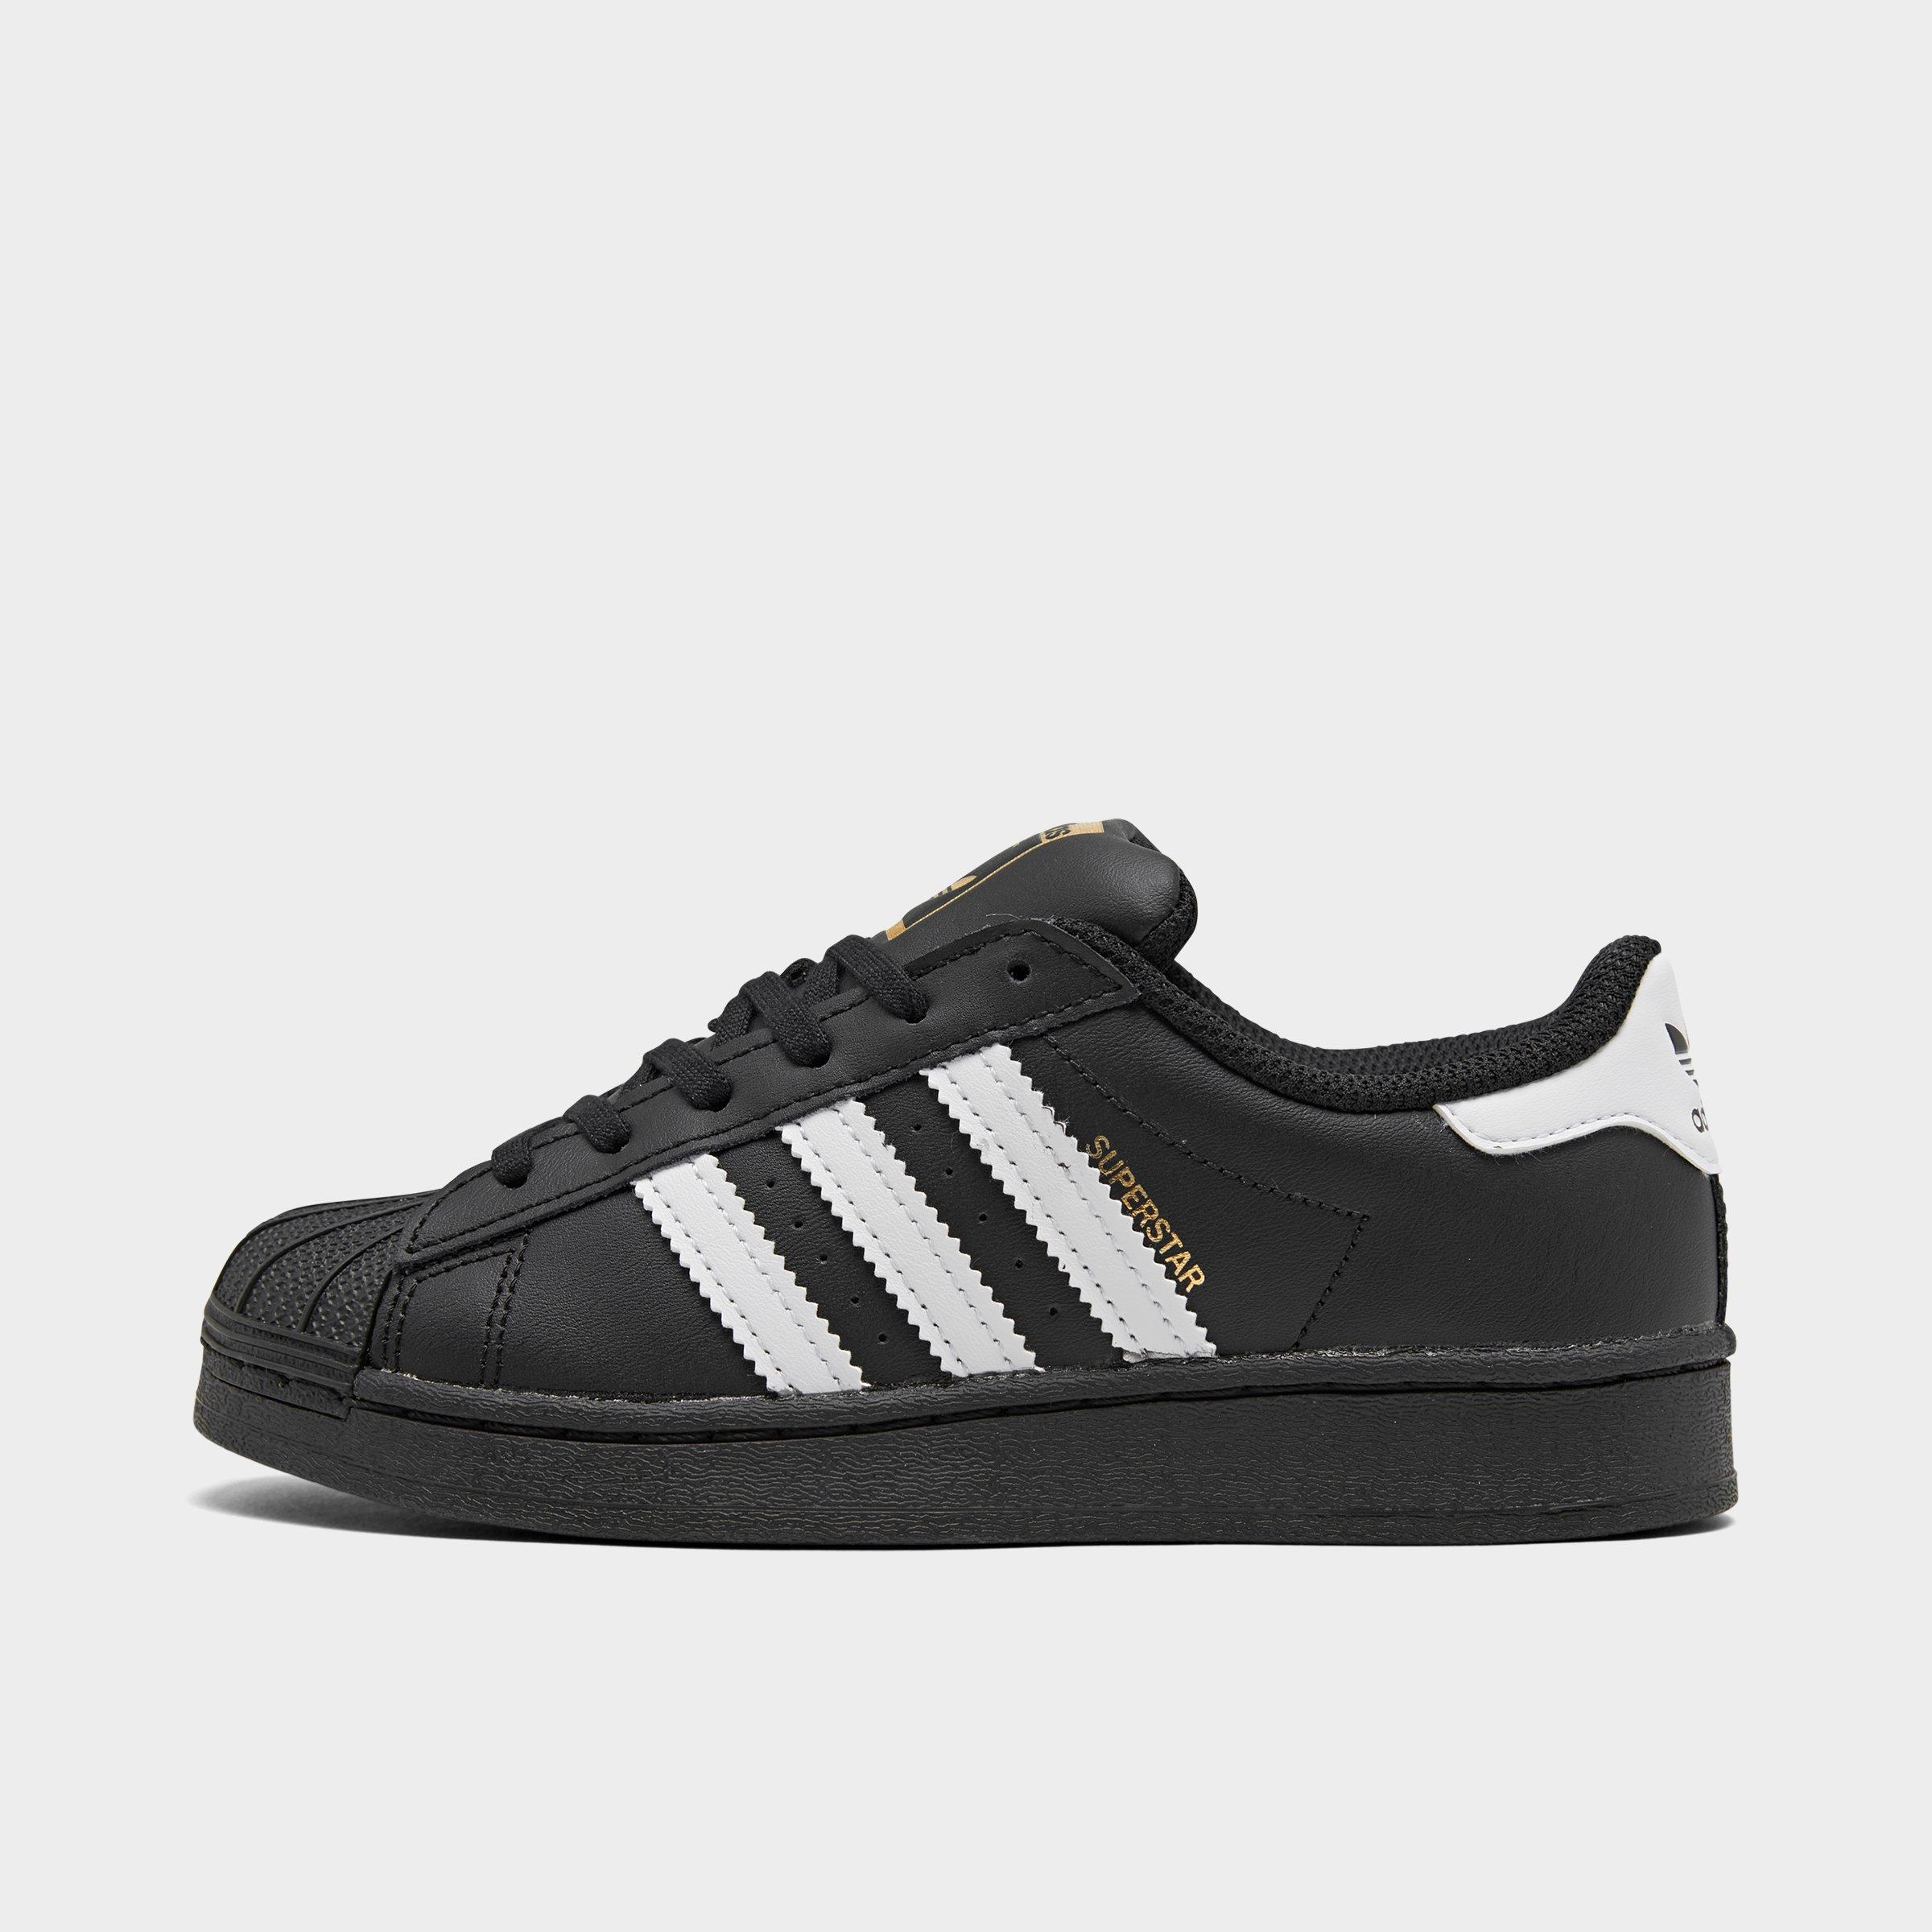 adidas little kid shoes